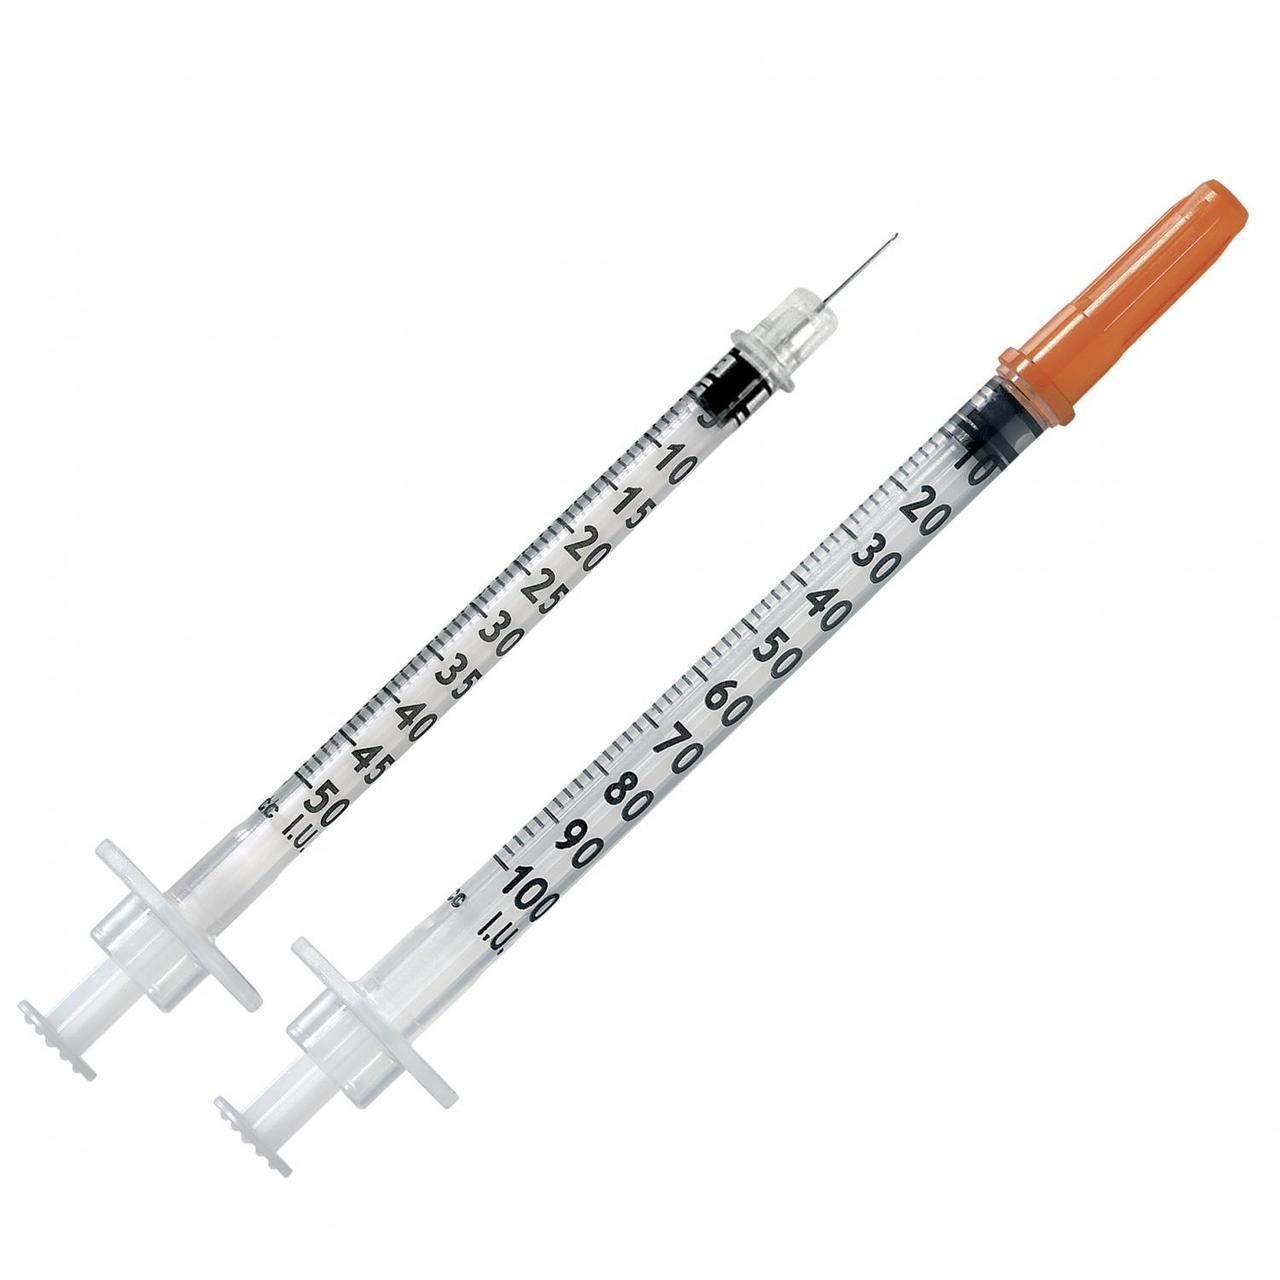 Medicine & Health: What are the sizes for insulin syringes?